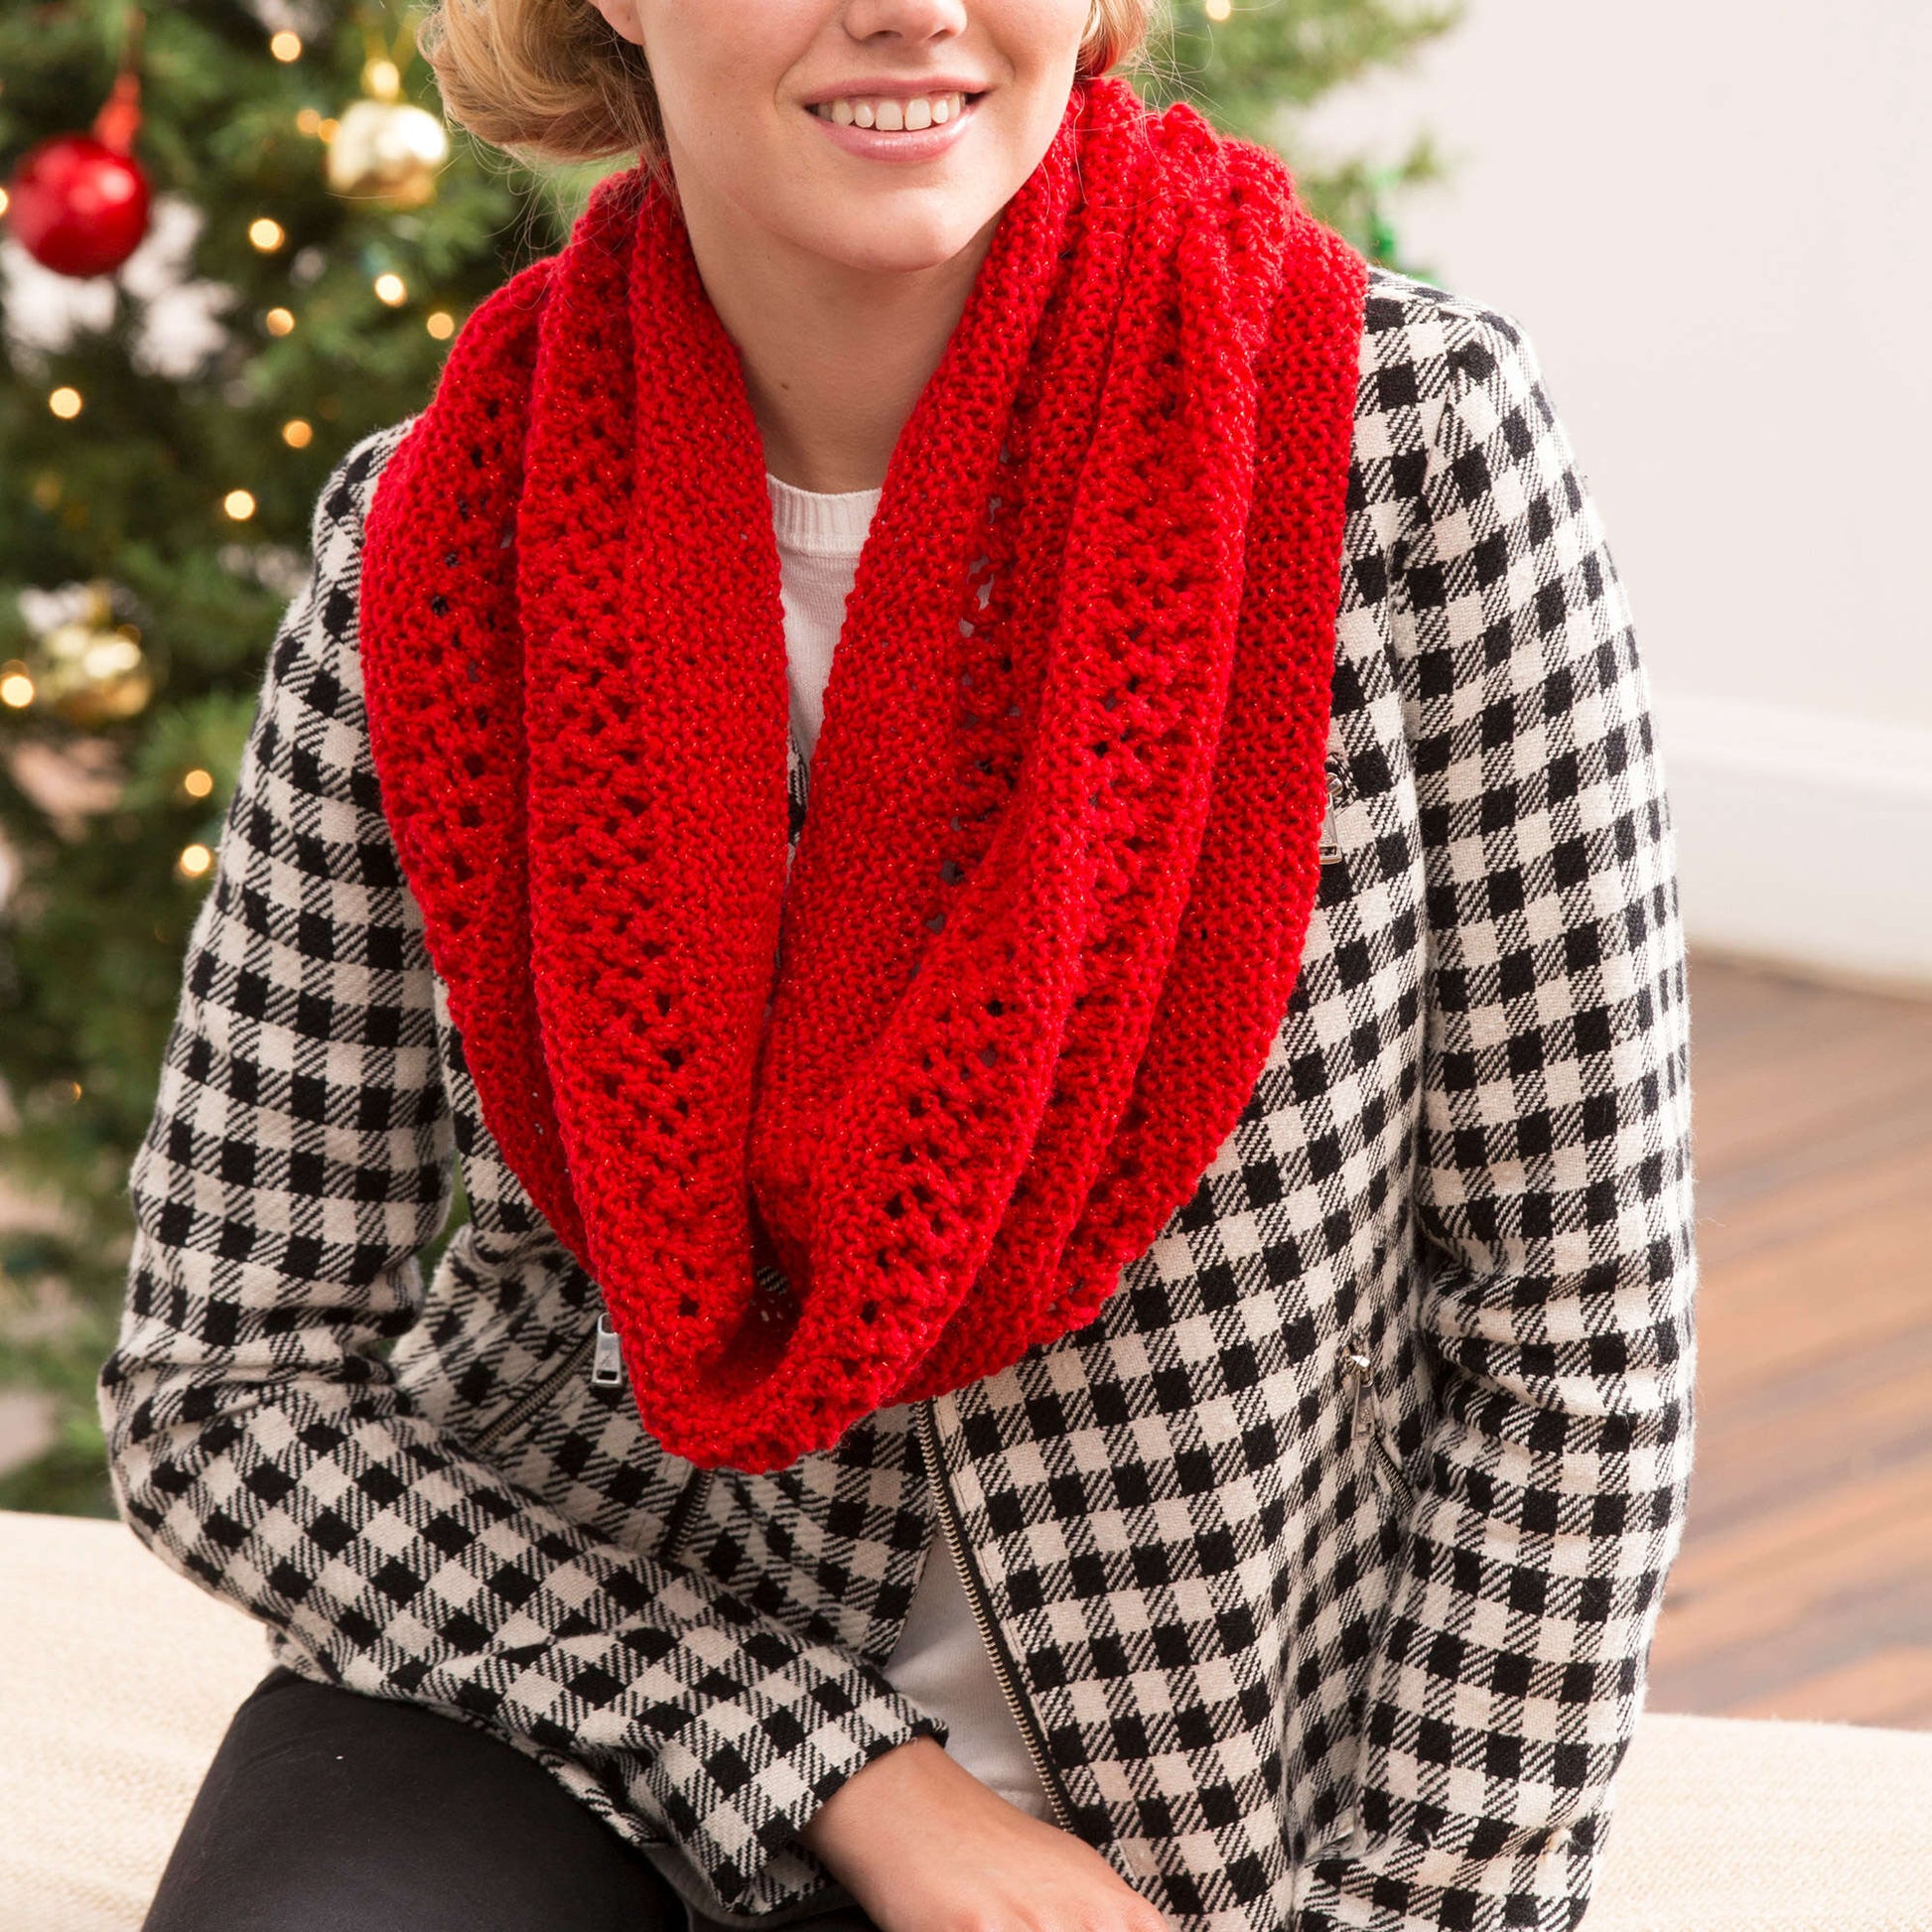 Free Red Heart Christmas Cowl Knit Pattern